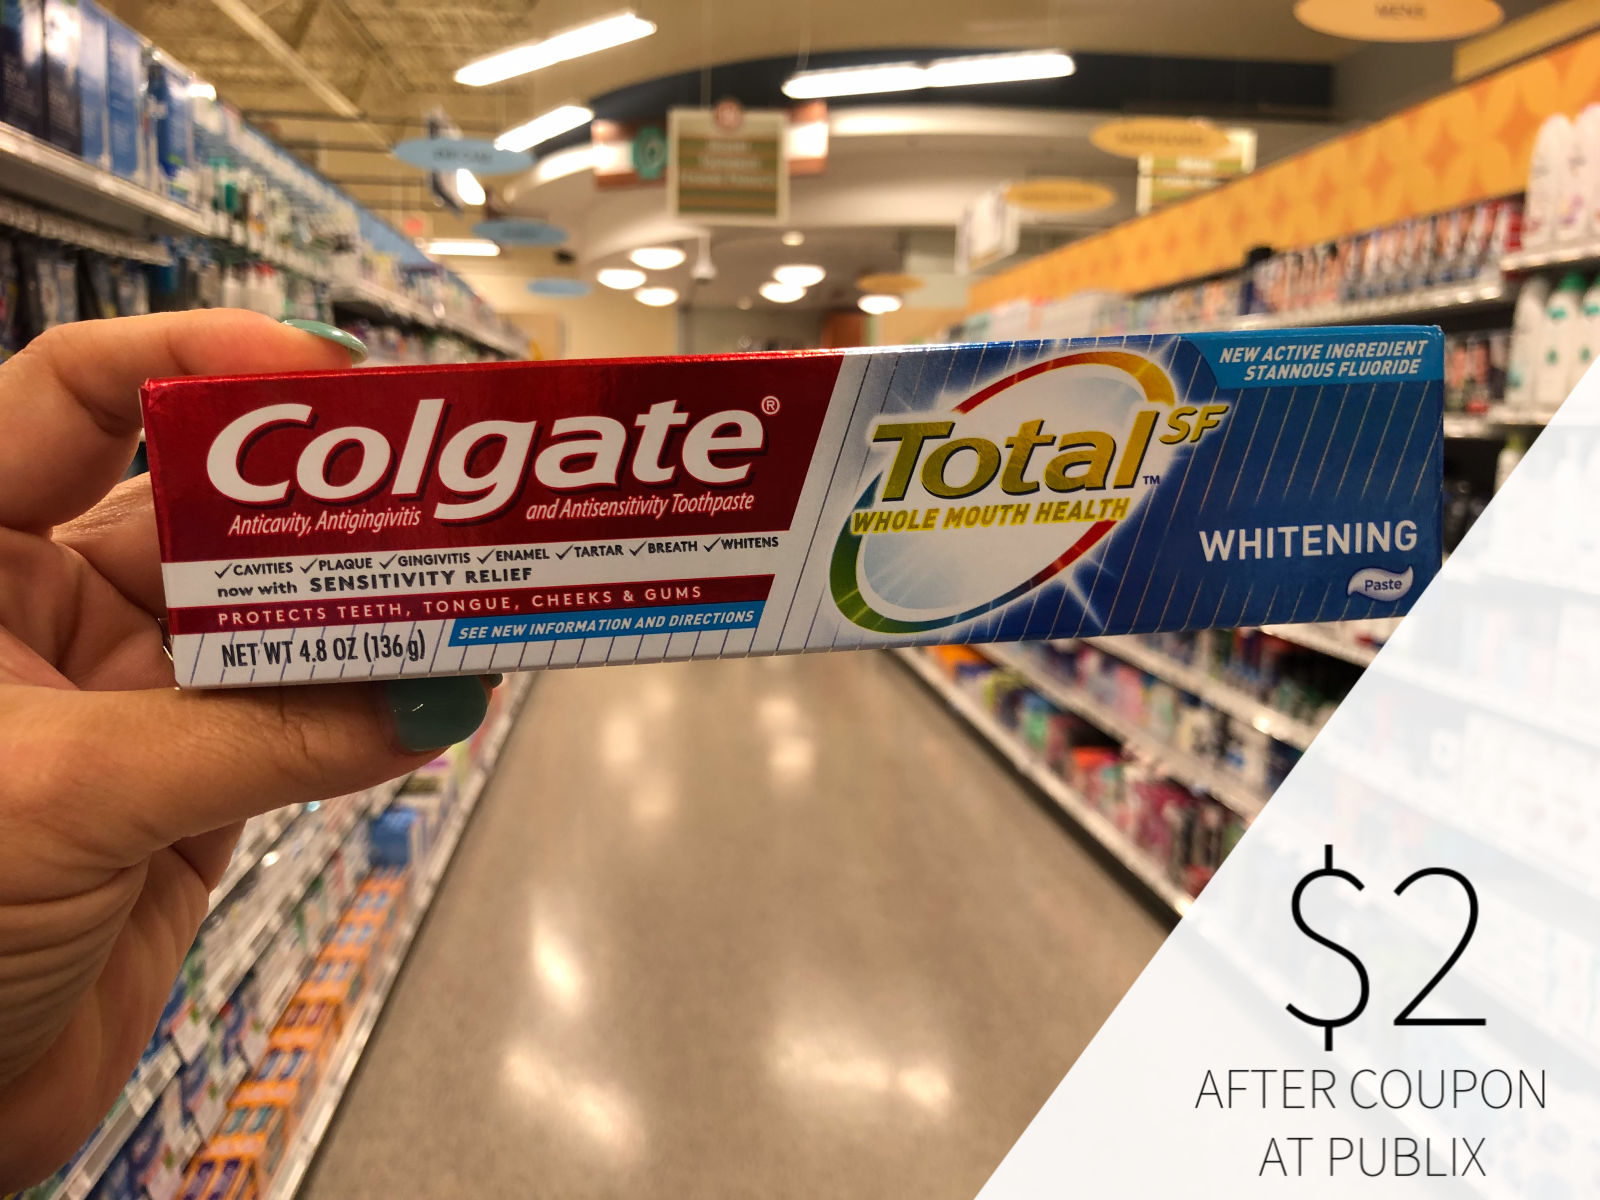 New Colgate Coupons Save On Toothpaste In The Upcoming Publix Ad